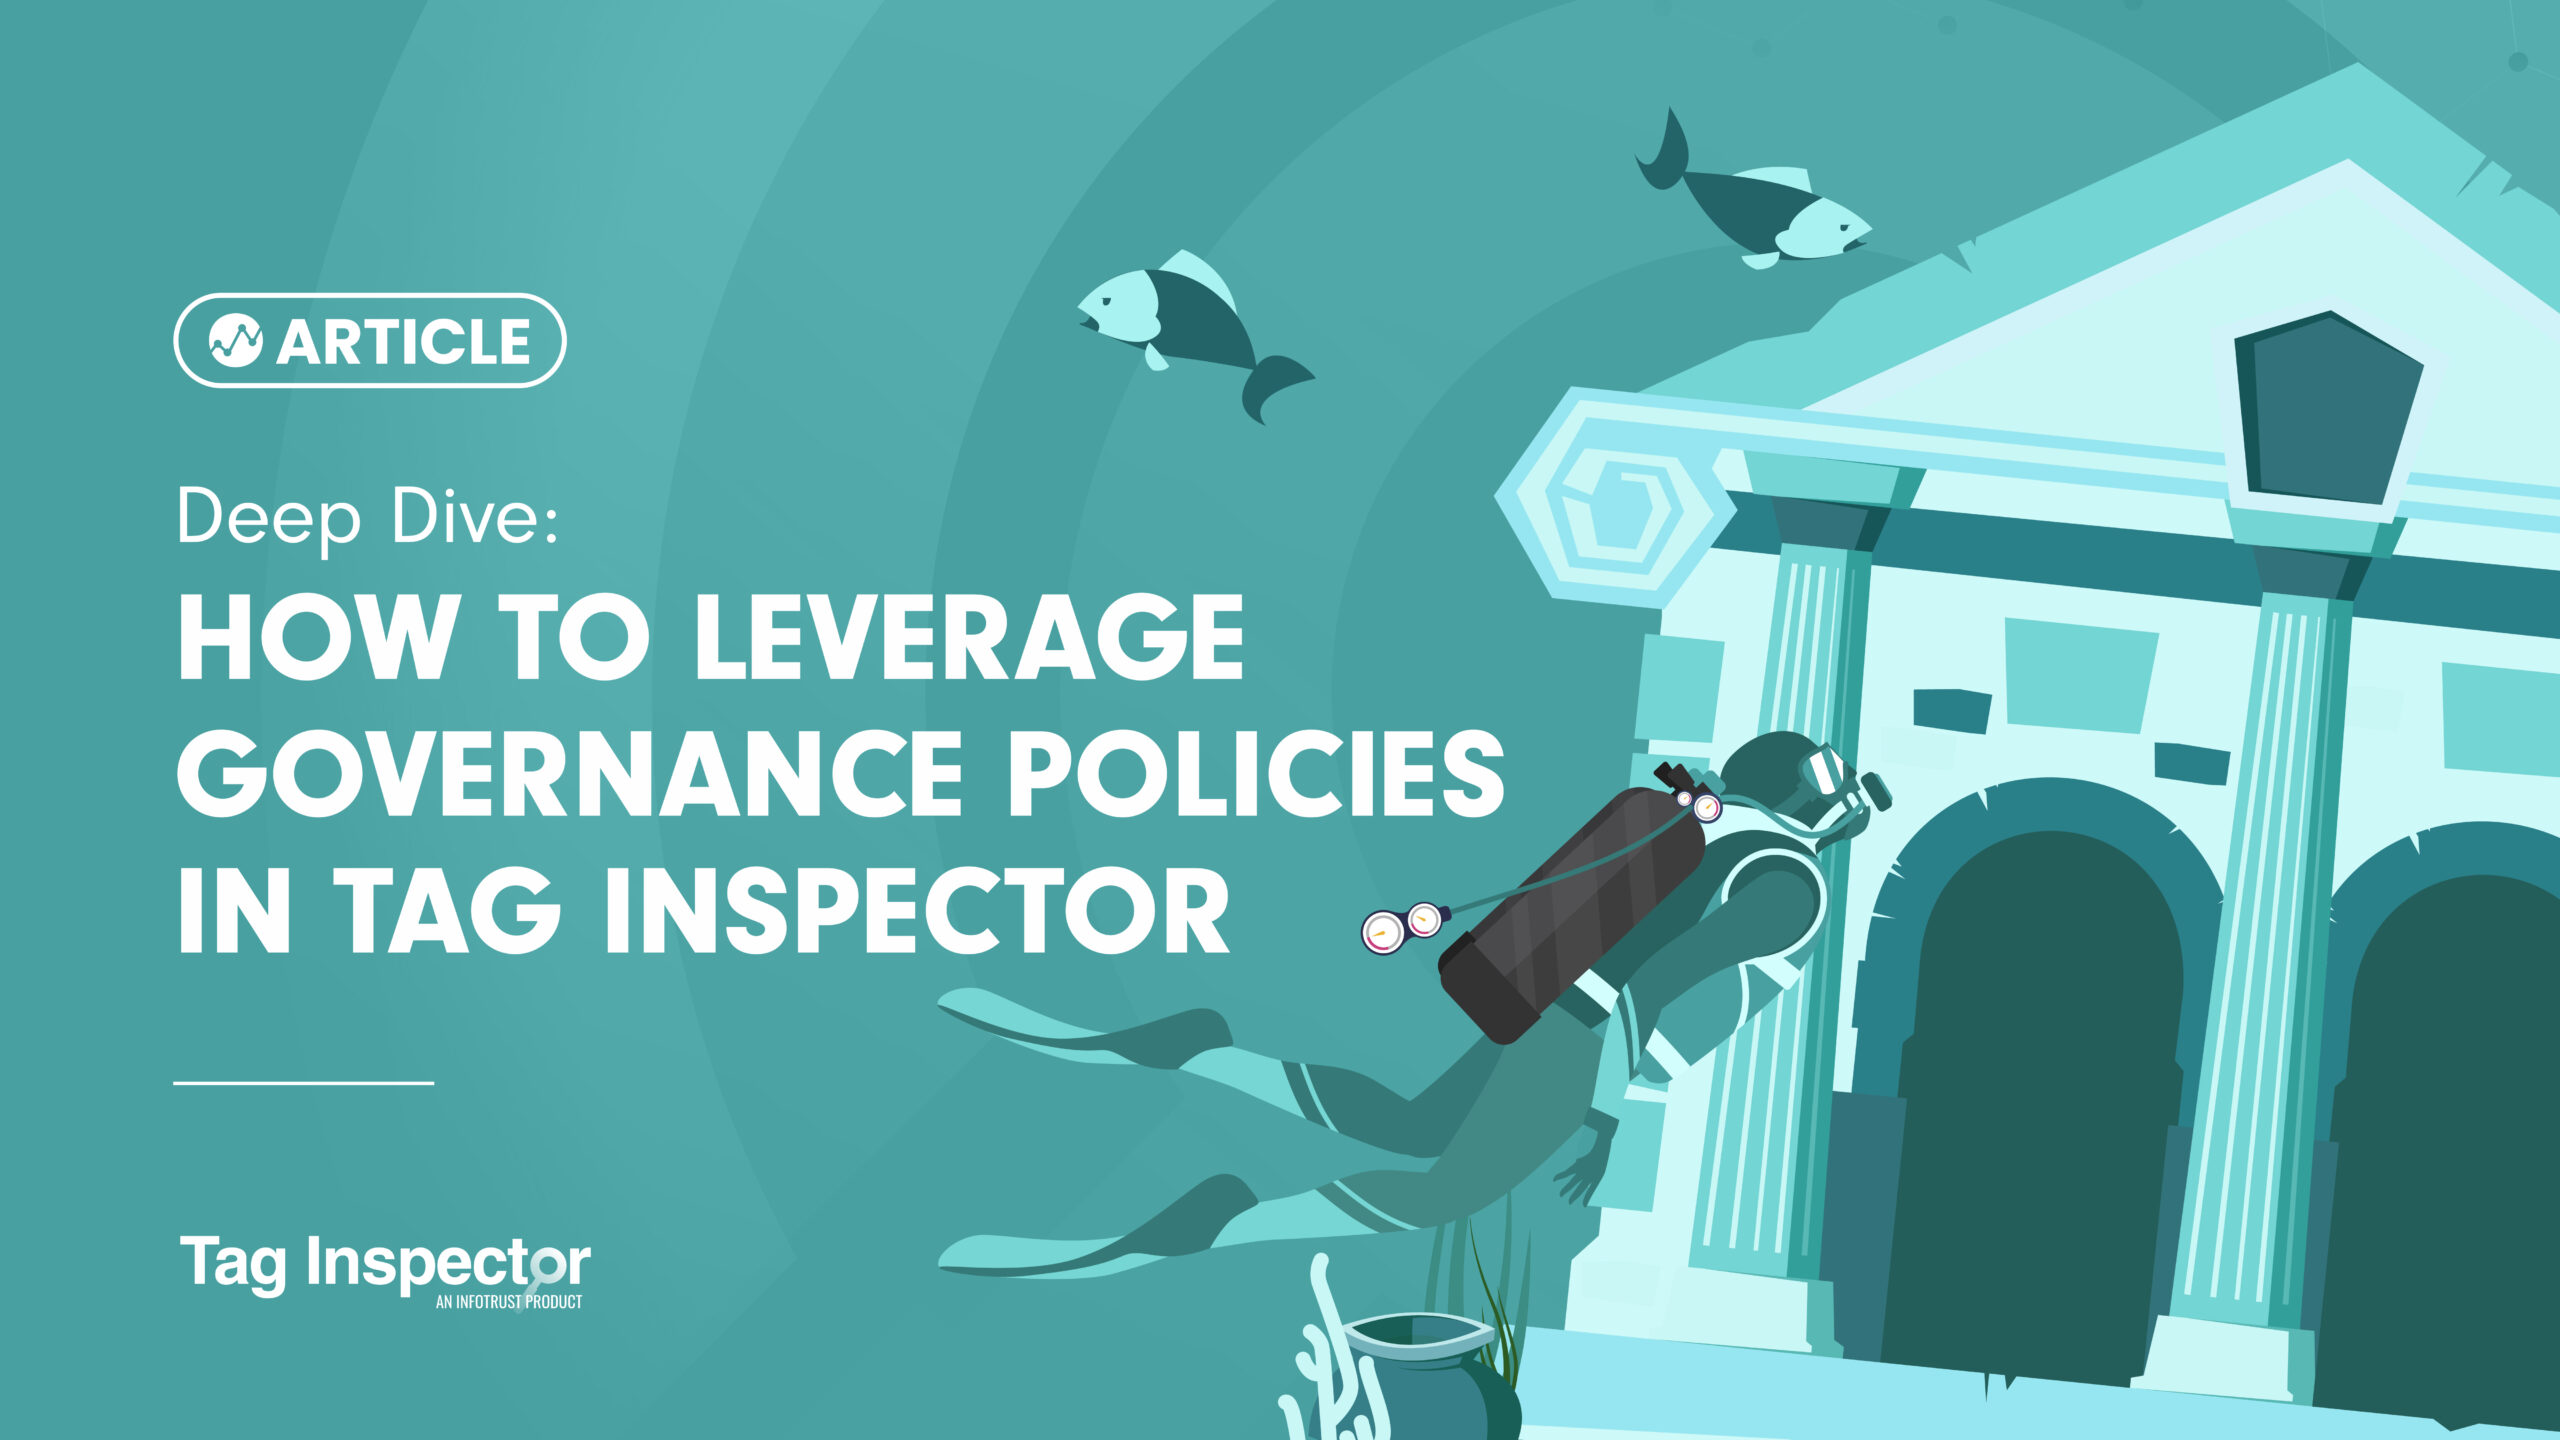 Deep Dive: How to Leverage Governance Policies in Tag Inspector